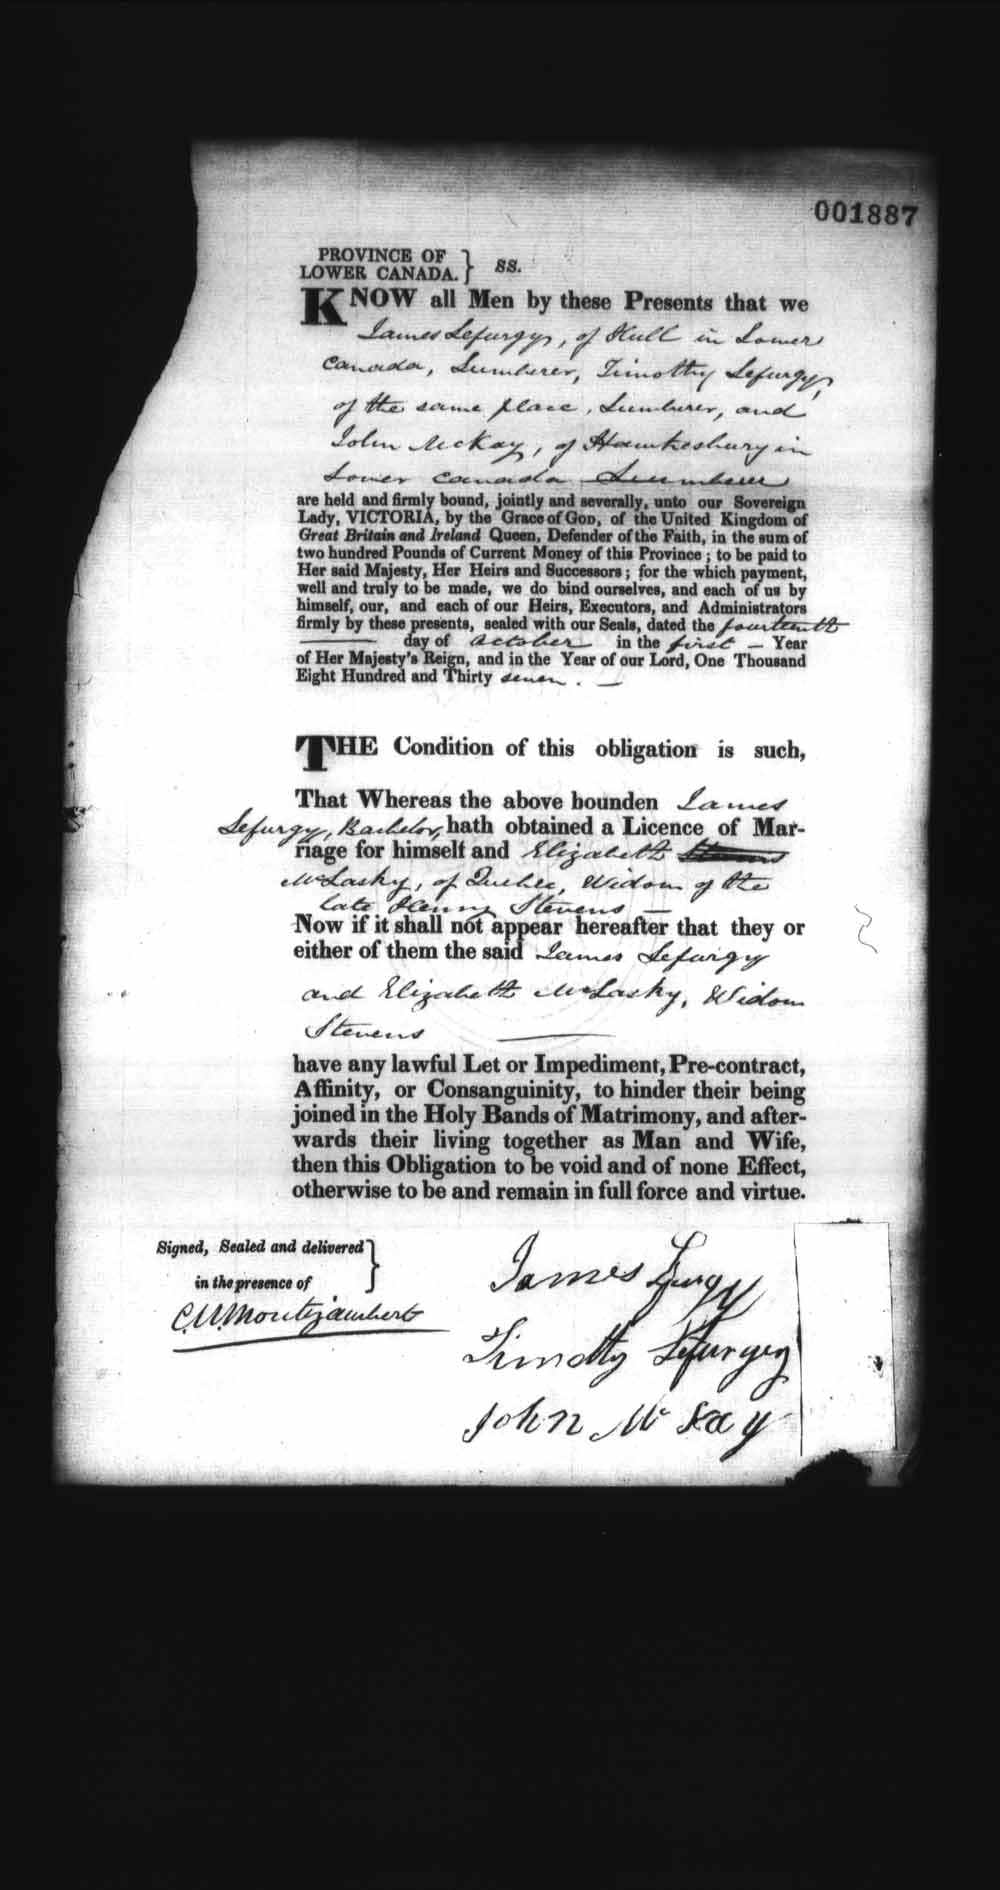 Digitized page of Upper and Lower Canada Marriage Bonds (1779-1865) for Image No.: e008238221